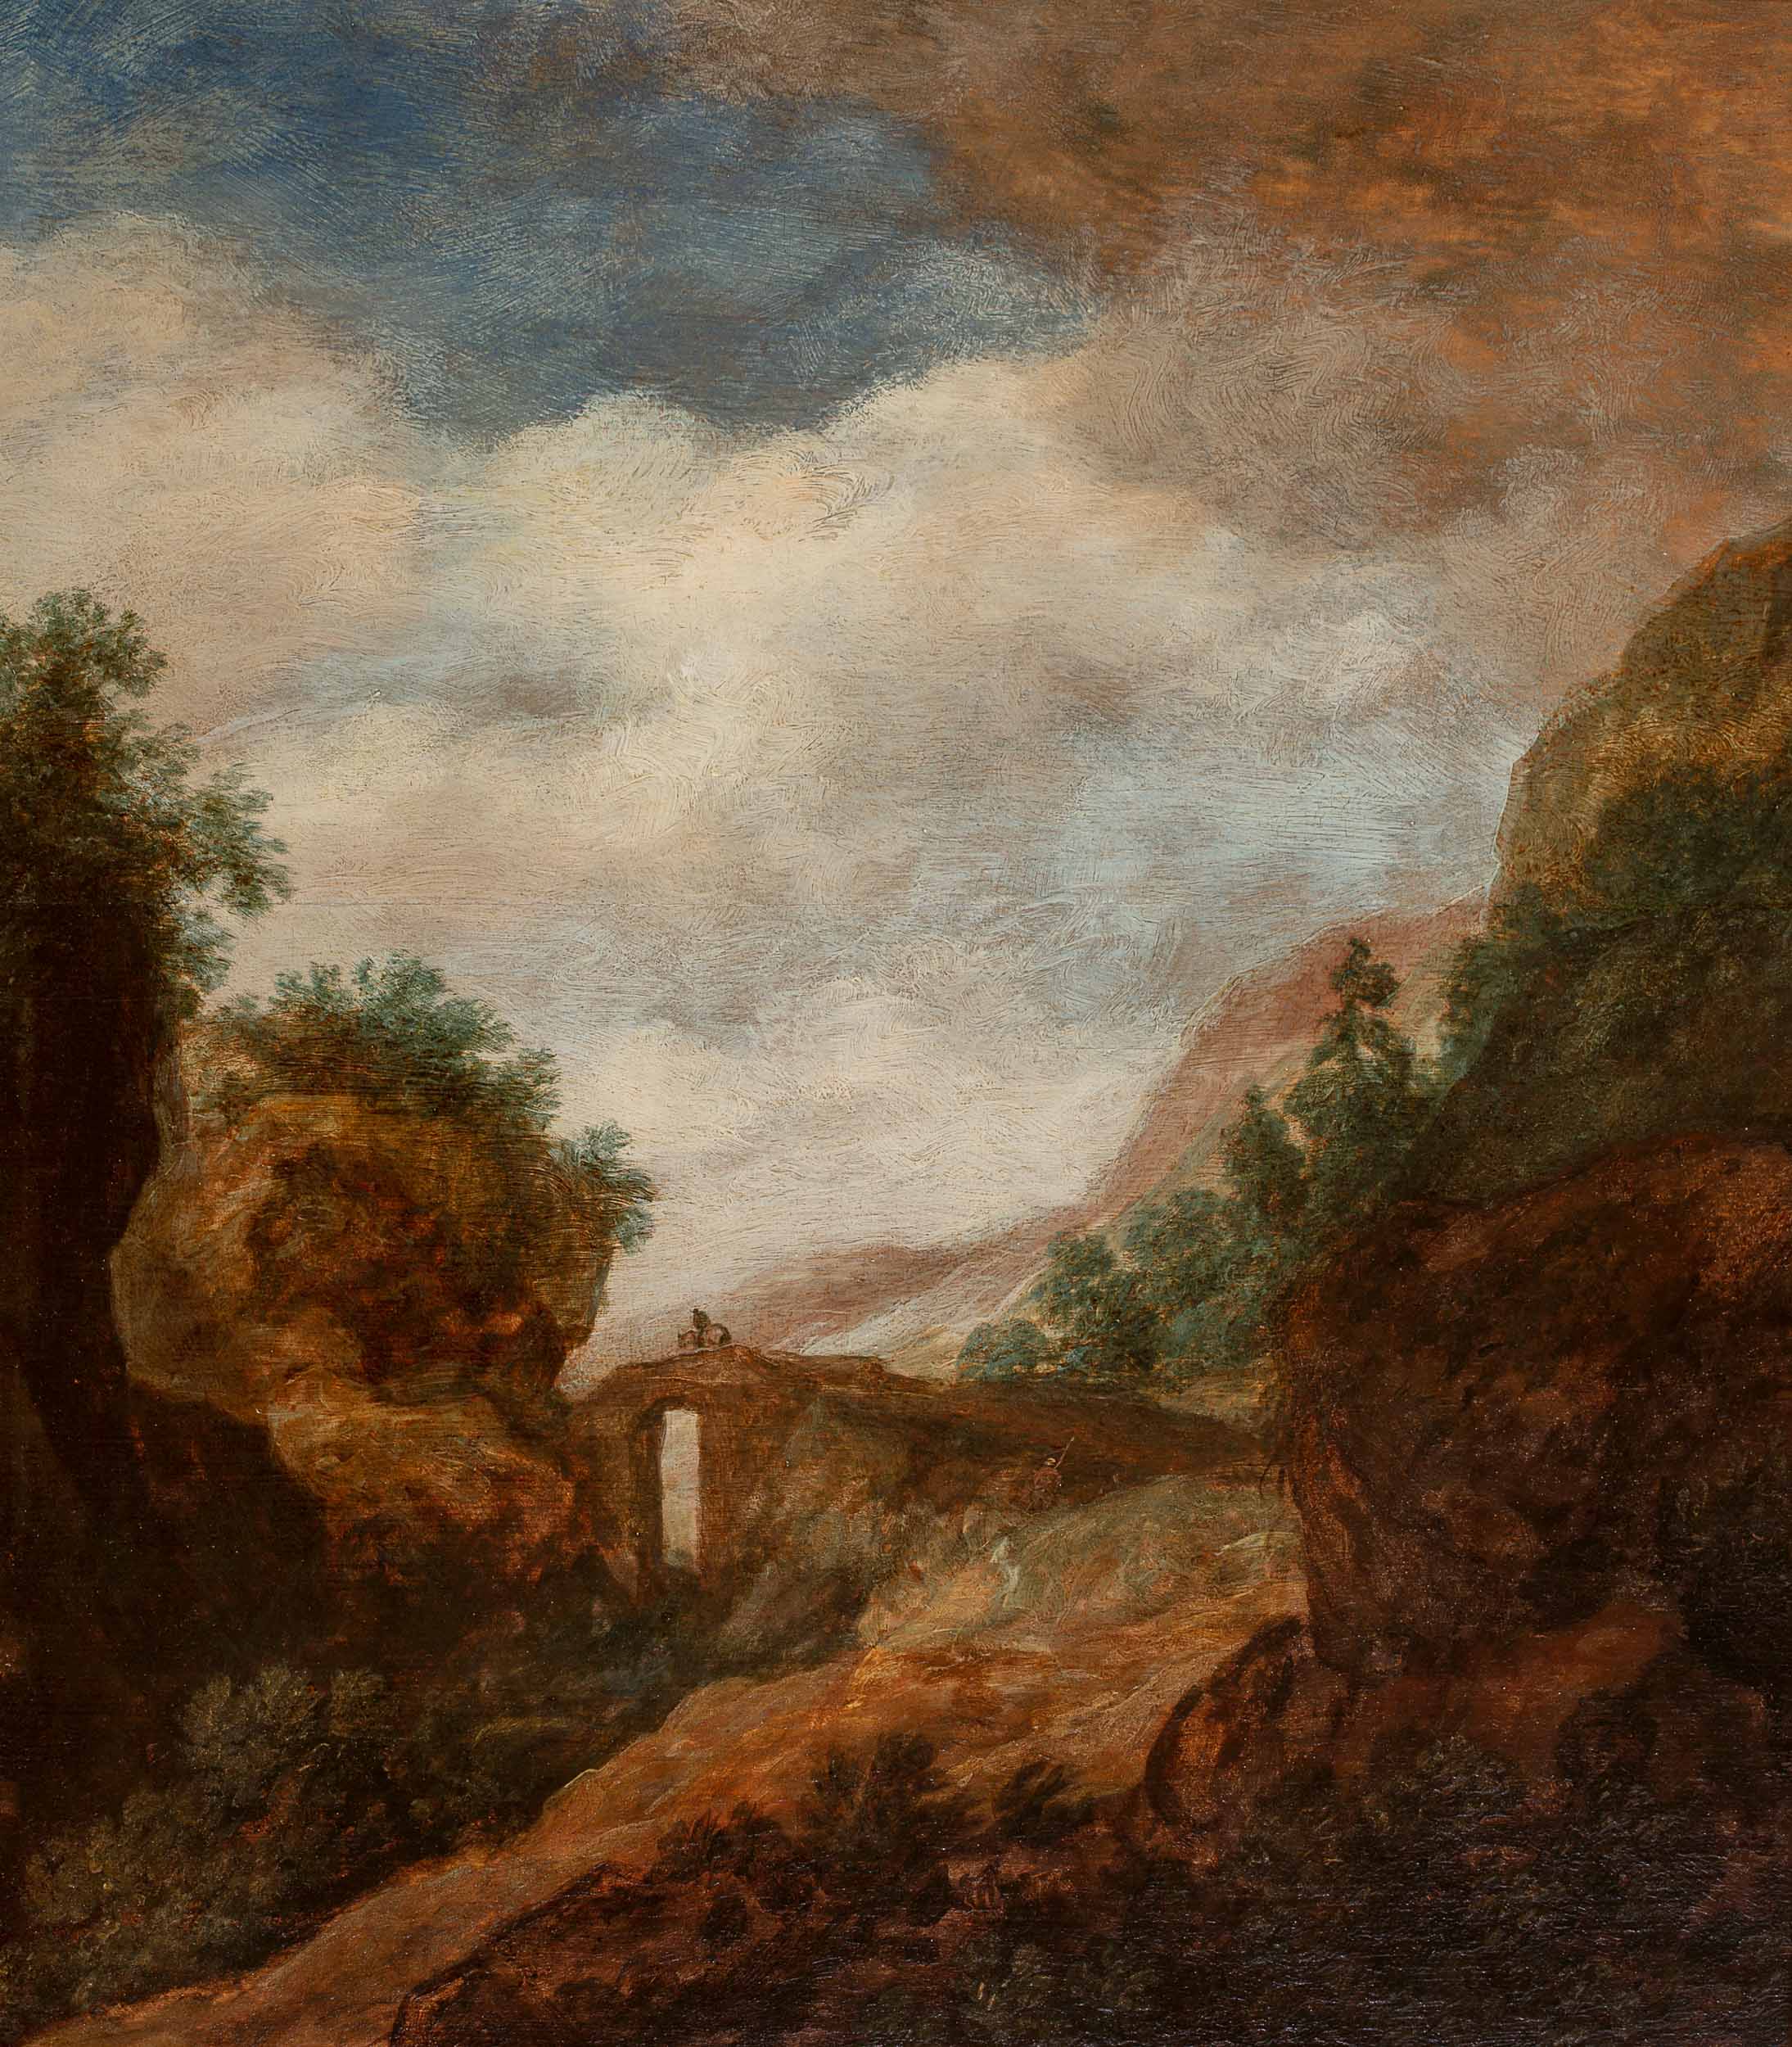 A landscape with a horse rider on a bridge